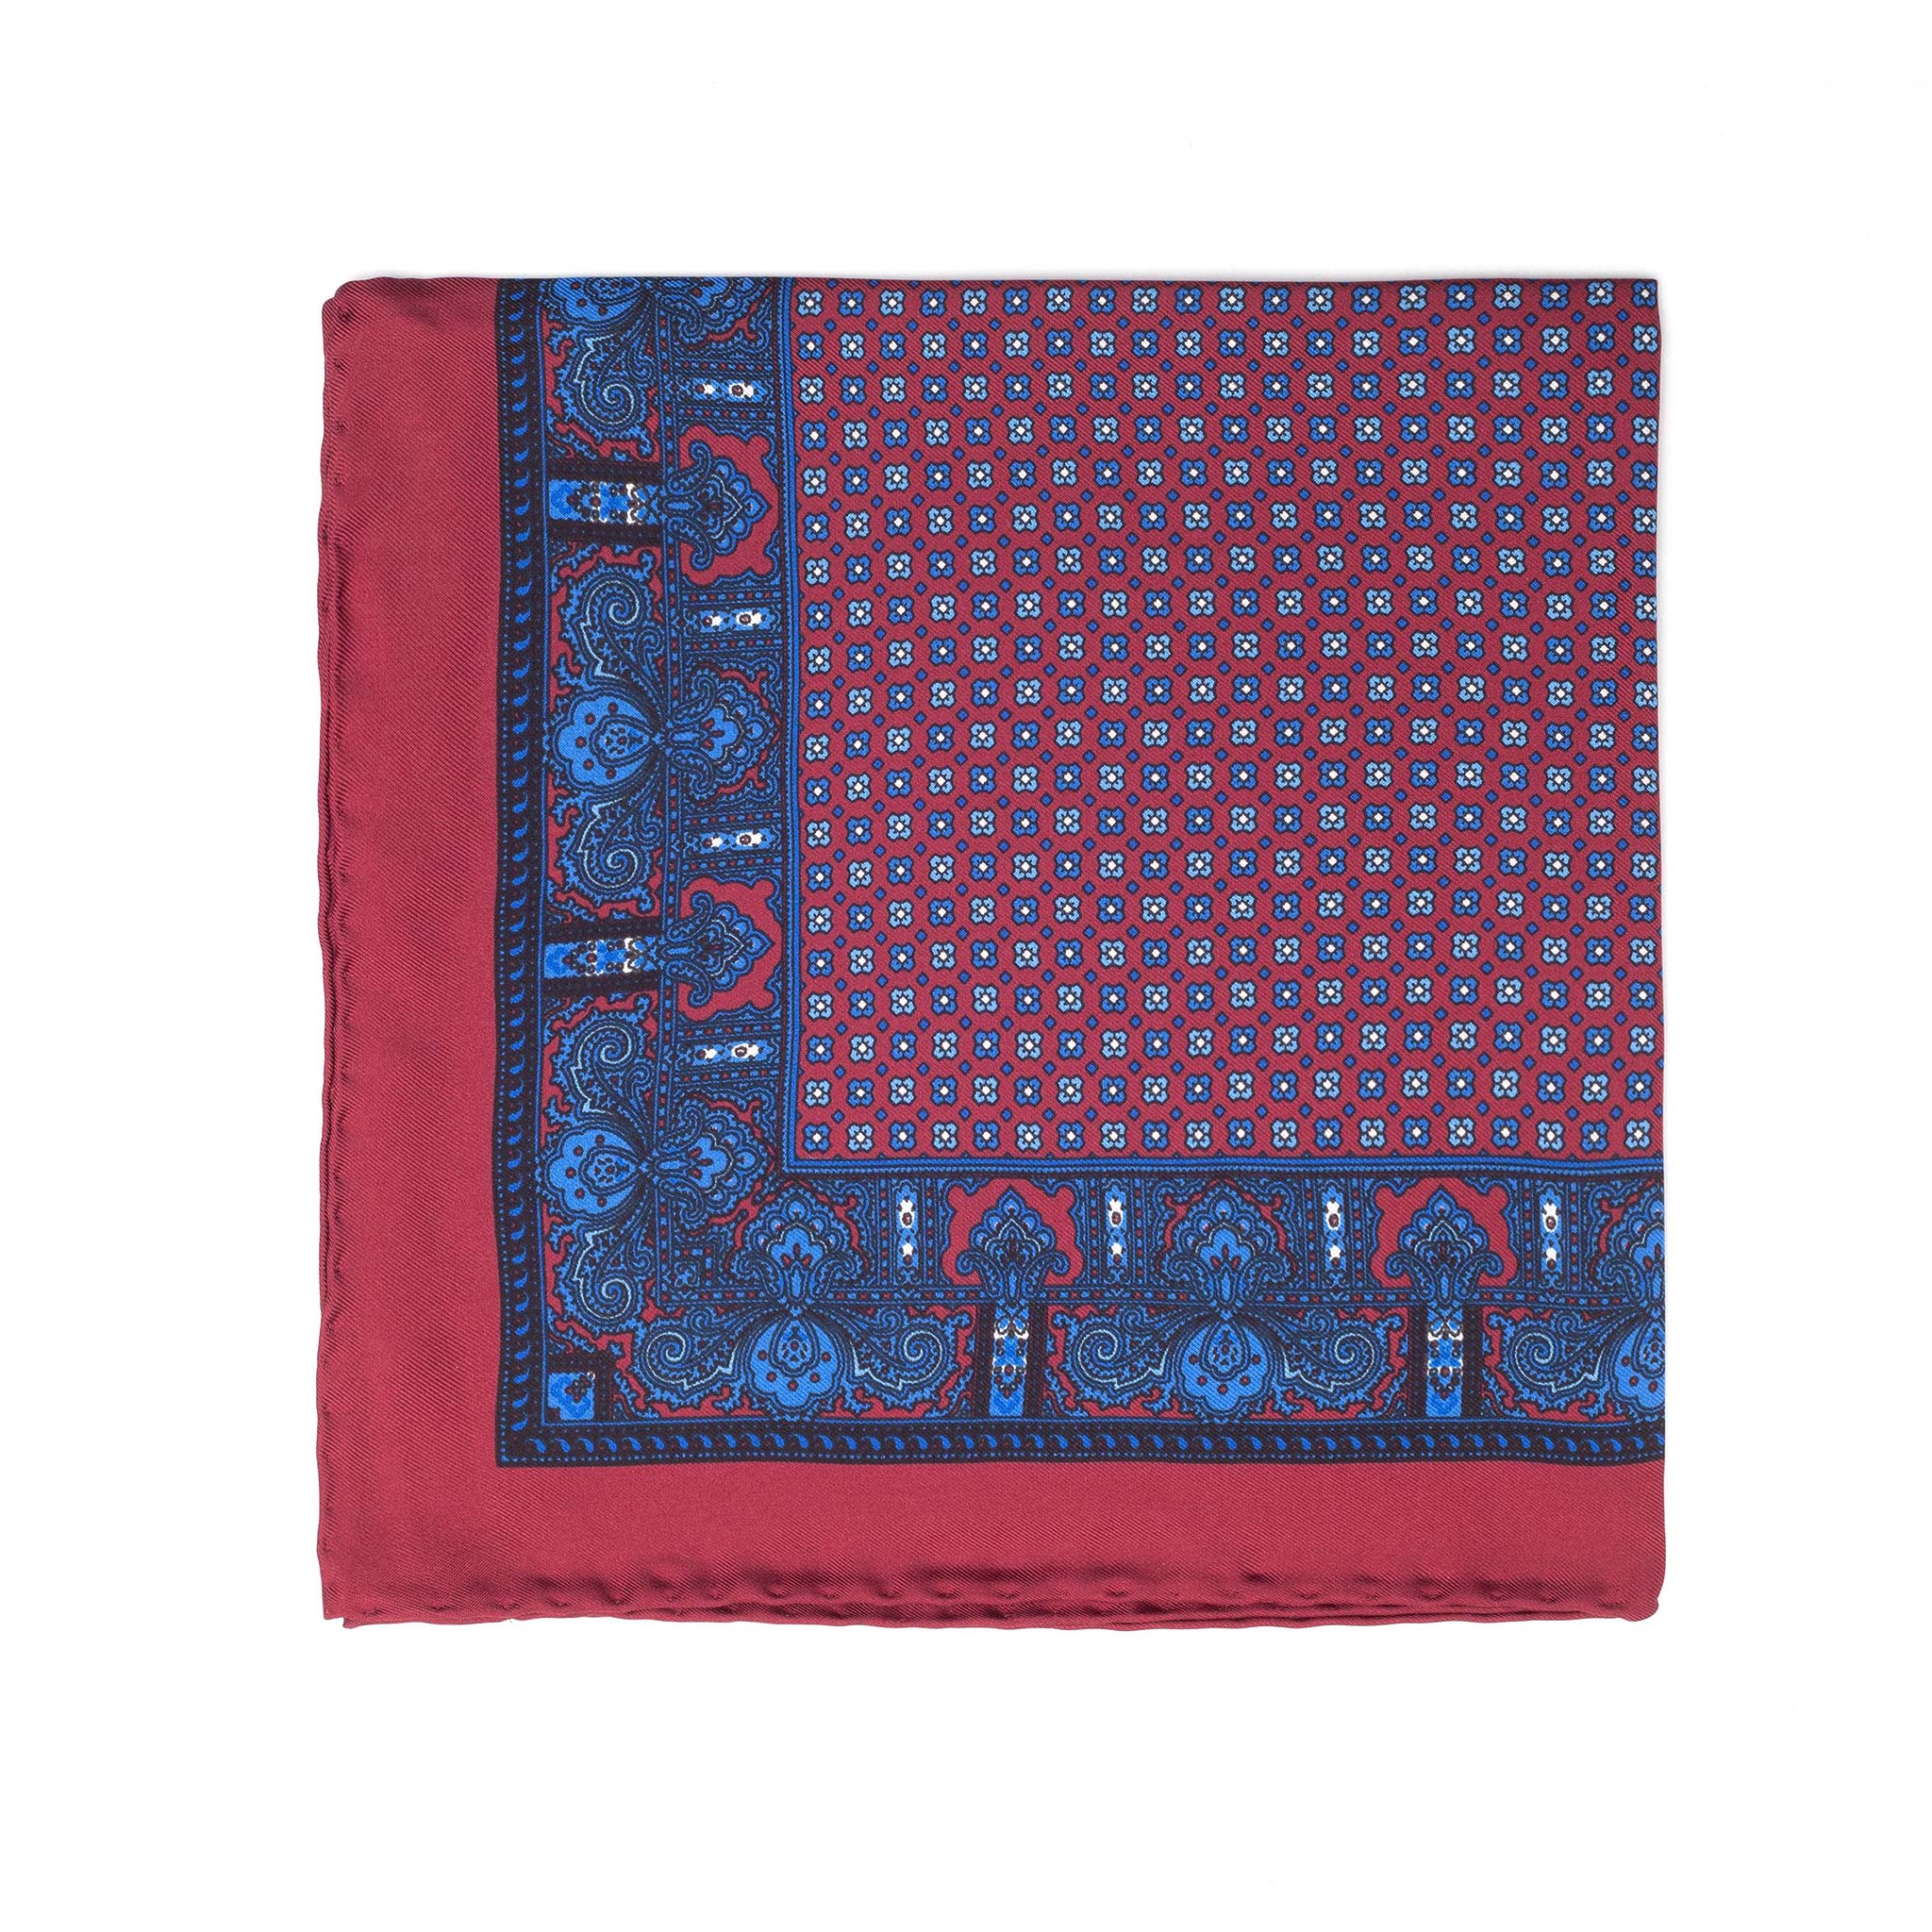 Silk Pocket Square with Hand-Rolled Edges, Burgundy Classic Border